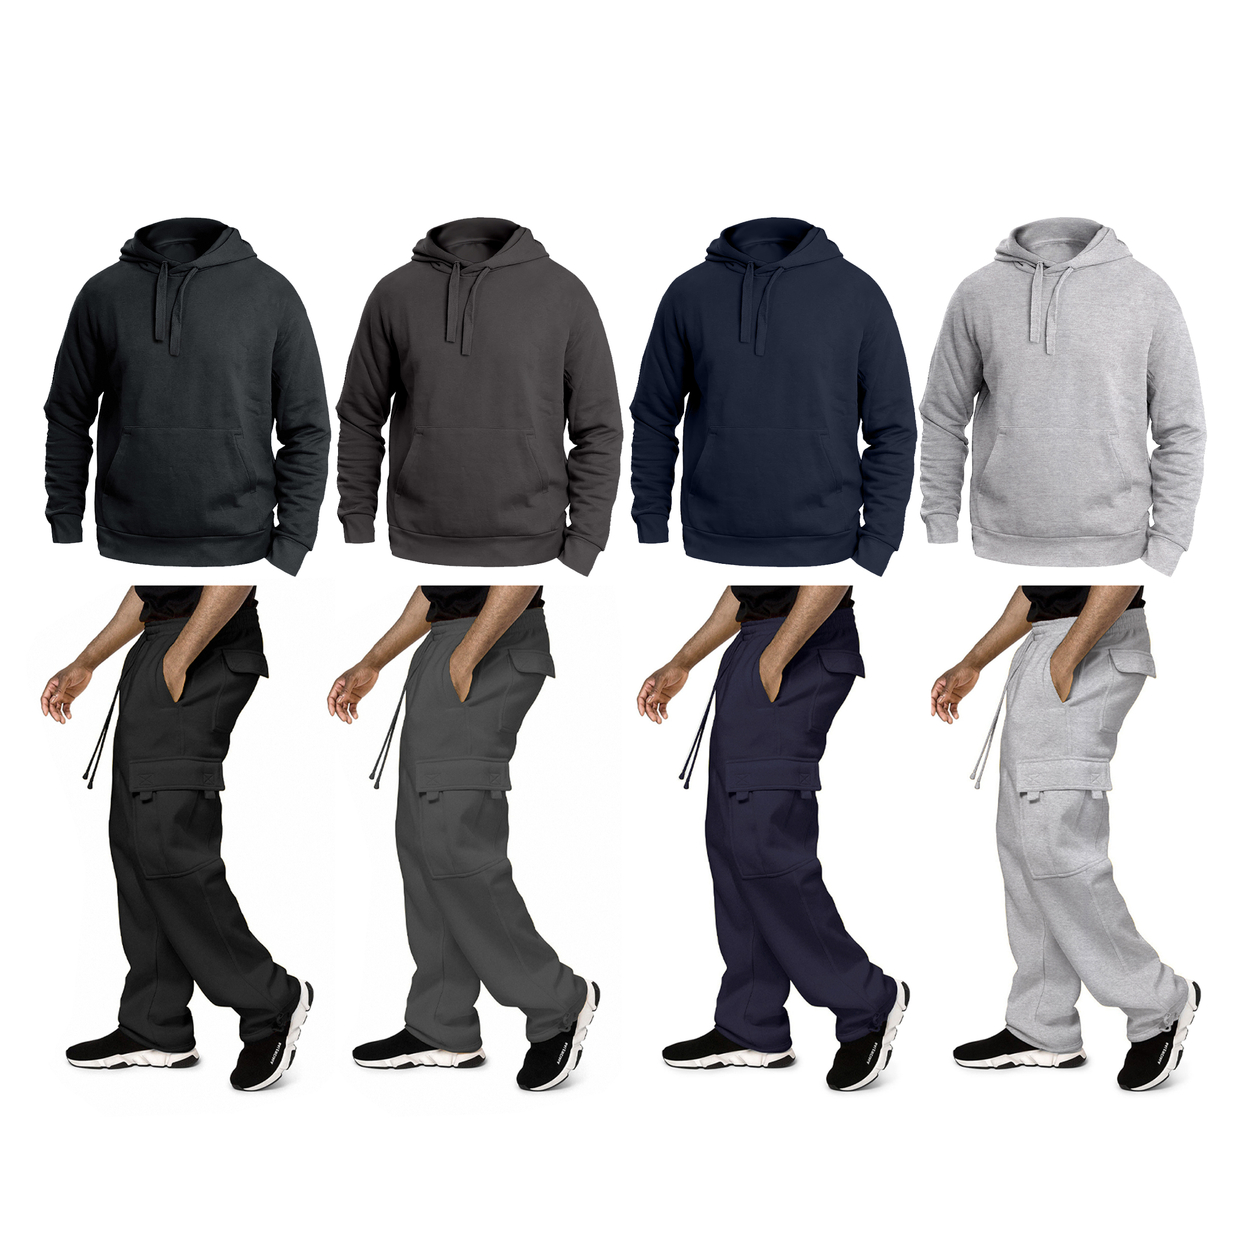 Multi-Pack: Big & Tall Men's Winter Warm Cozy Athletic Fleece Lined Multi-Pocket Cargo Sweatsuit - Charcoal, 1-pack, Large